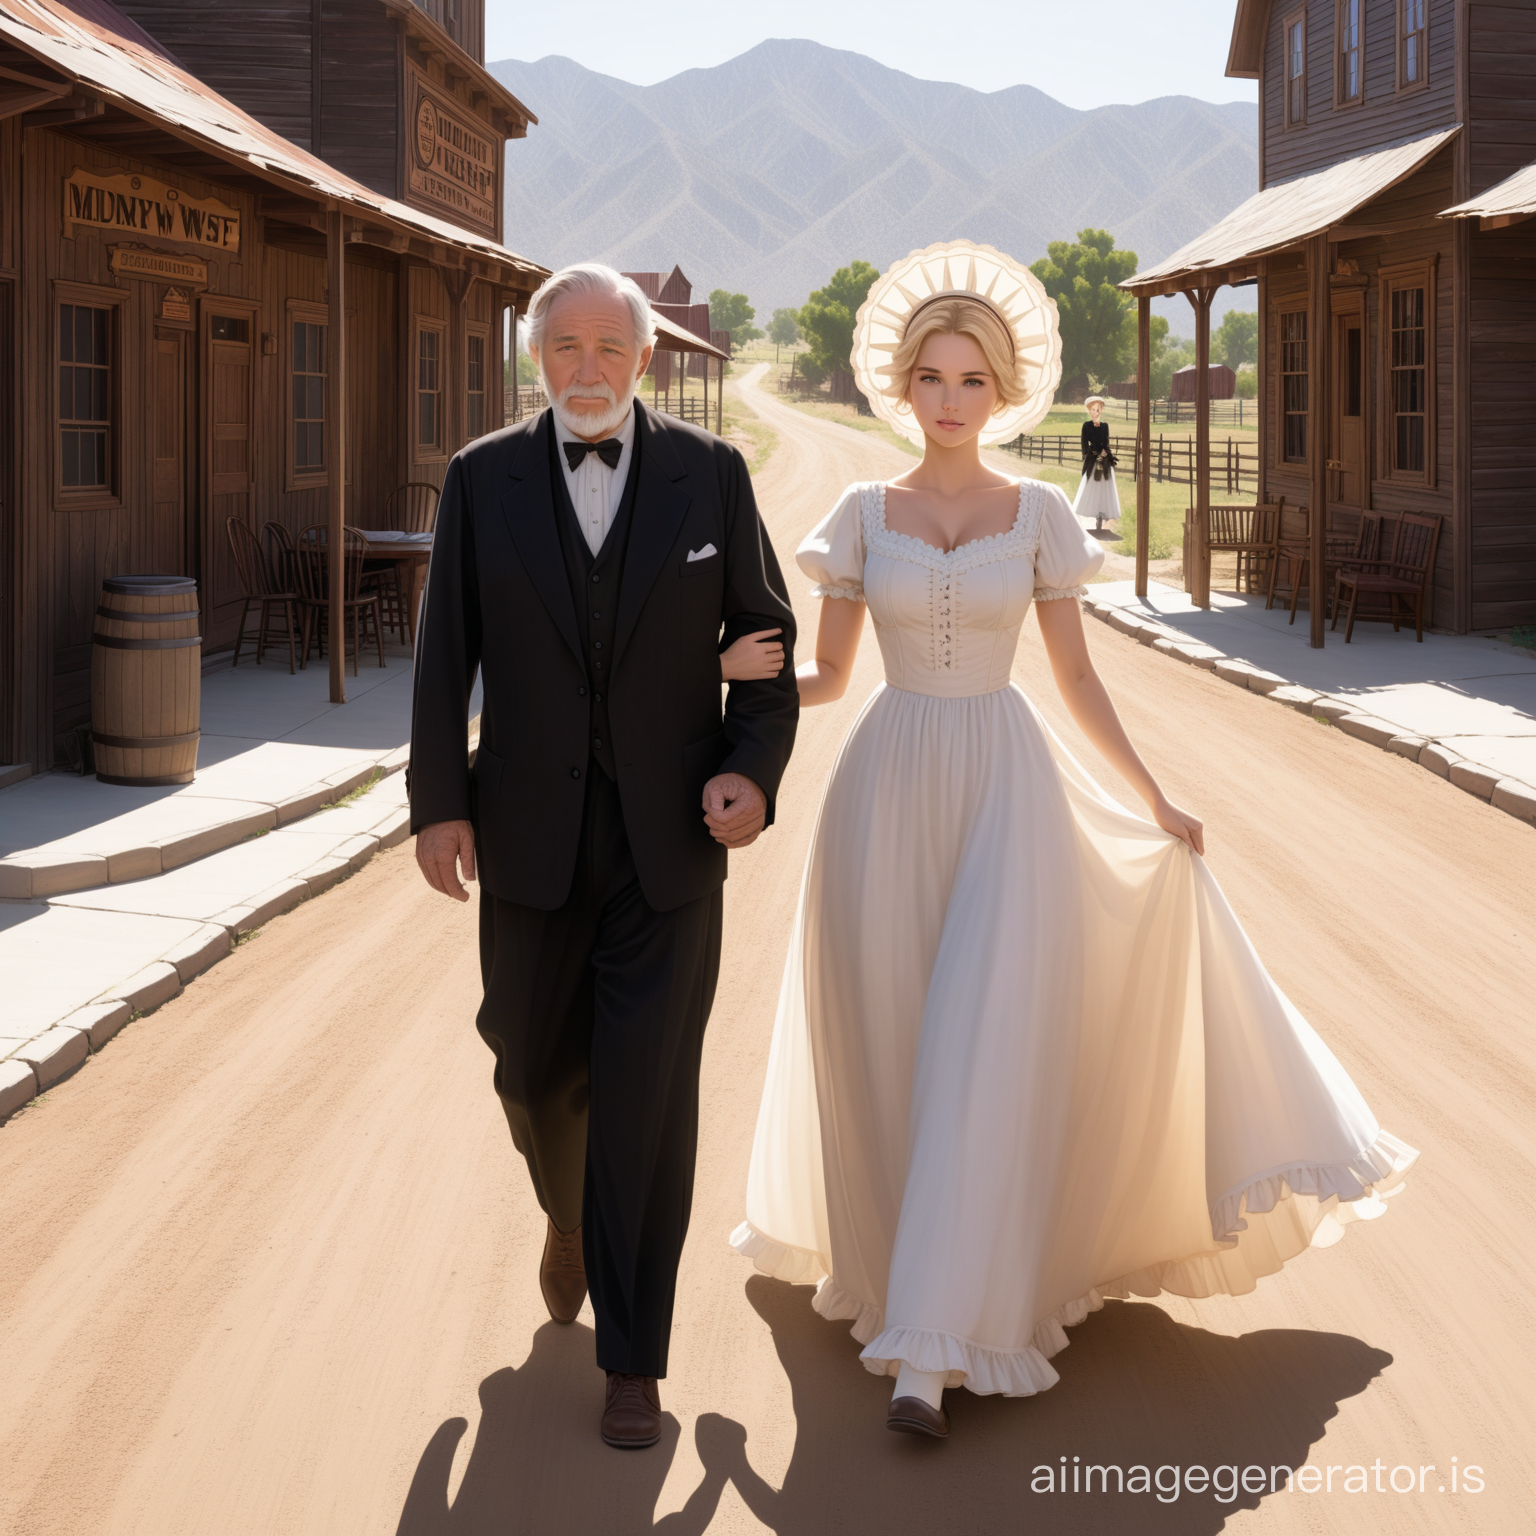 Susan Storm from the FF4 wearing a brown floor-length loose billowing old west poofy modest dress as a farmer's wife with a frilly bonnet walking on a old west era sidewalk with an old man dressed into a black suit who seems to be her newlywed husband